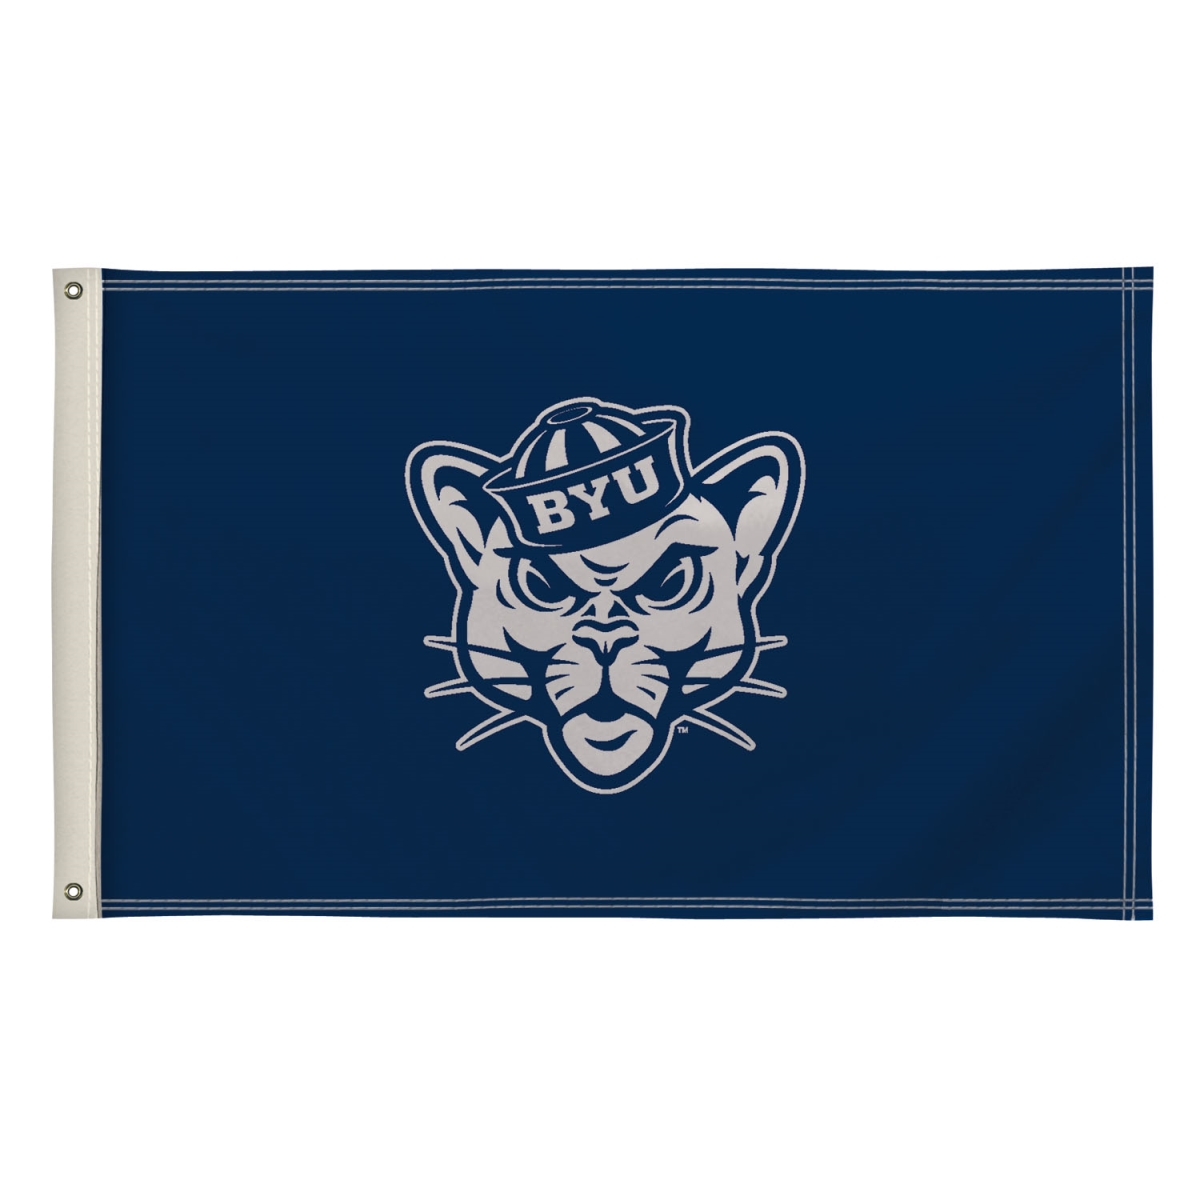 Picture of Showdown Displays 810003BYU-002 3 x 5 ft. Brigham Young Cougars NCAA Flag - No.002